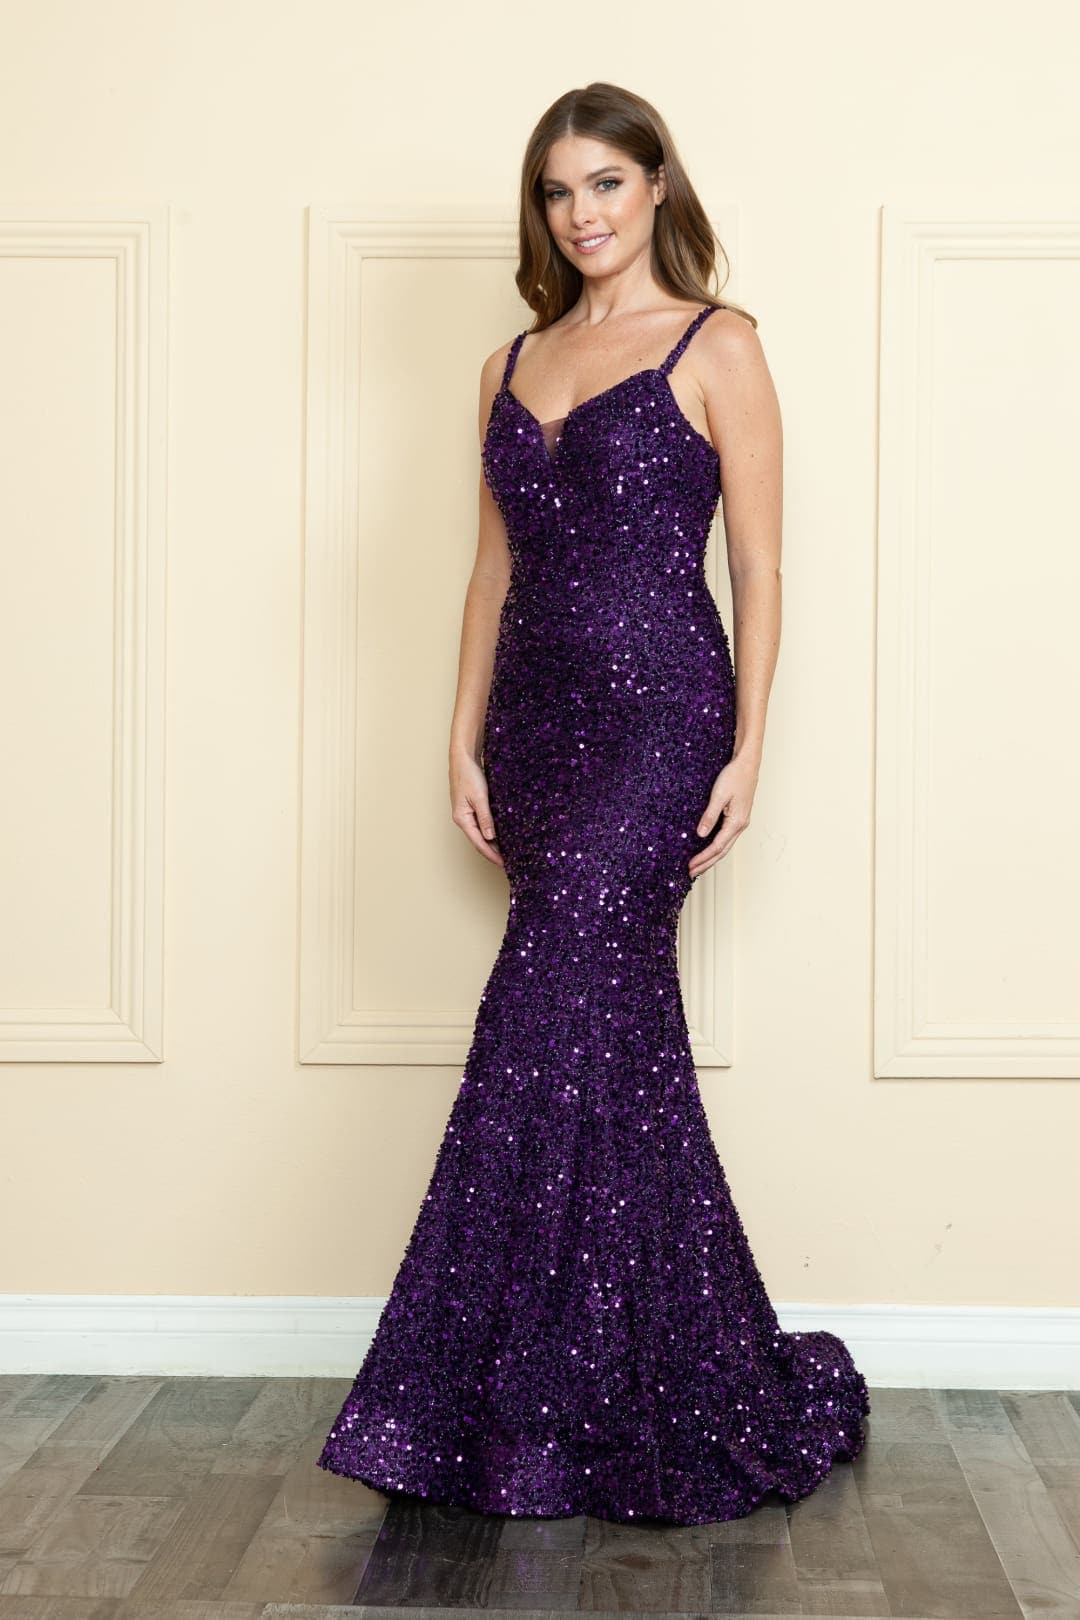 Special Occasion Formal Gown